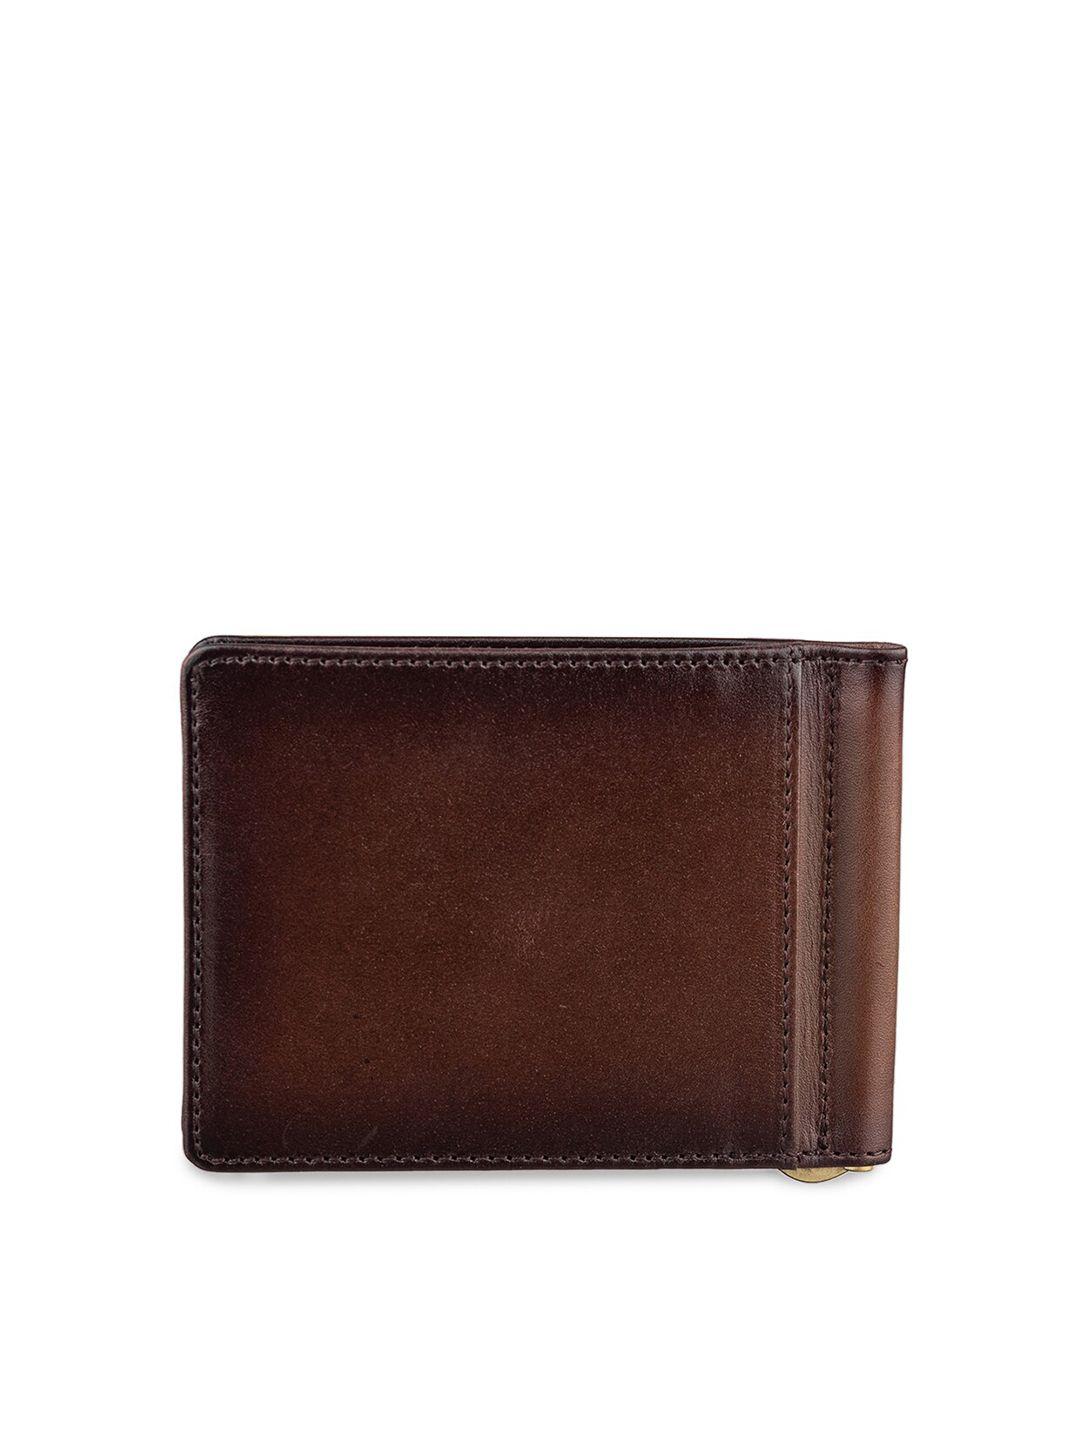 brown bear leather money clip with rfid